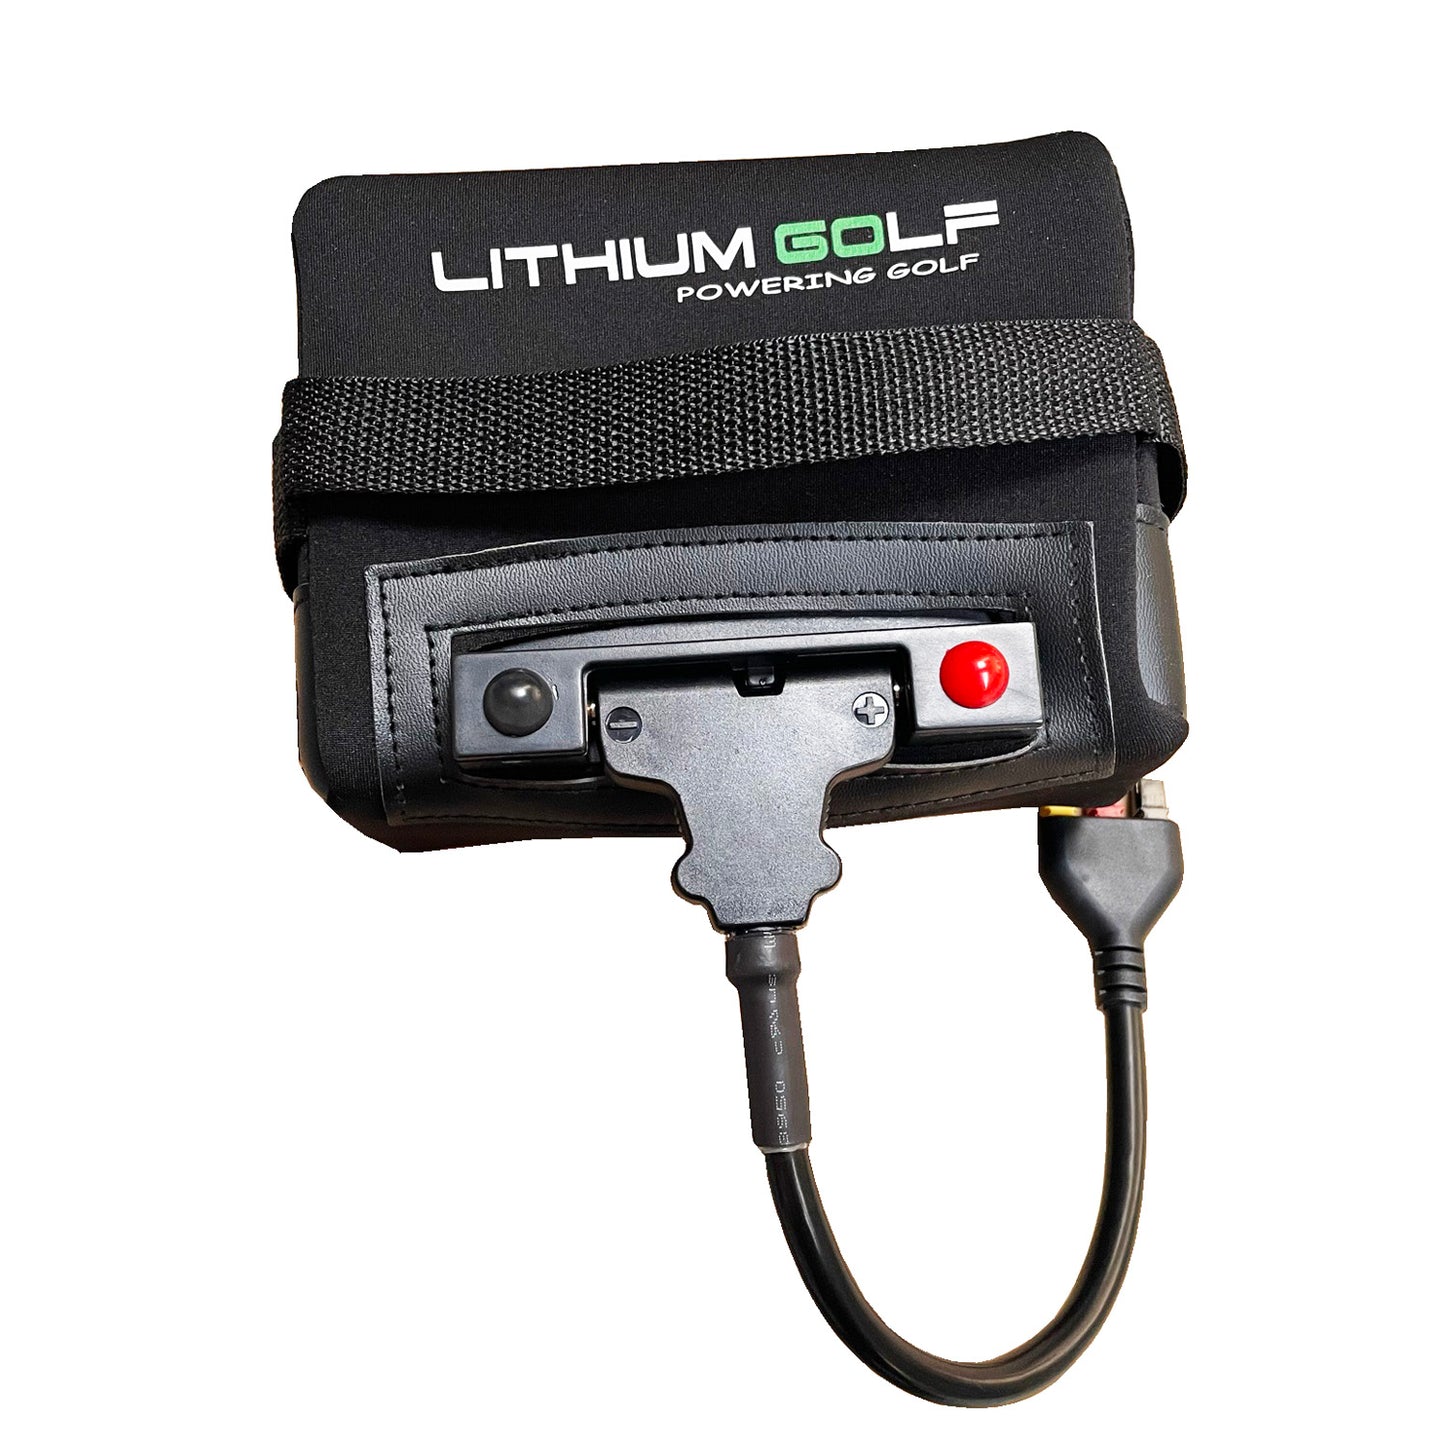 Golf Trolley Battery 18ah 27 Hole LiFePo4 Battery for Powakaddy FW 3, FW 5, FW 7 with 3 Way Adapter